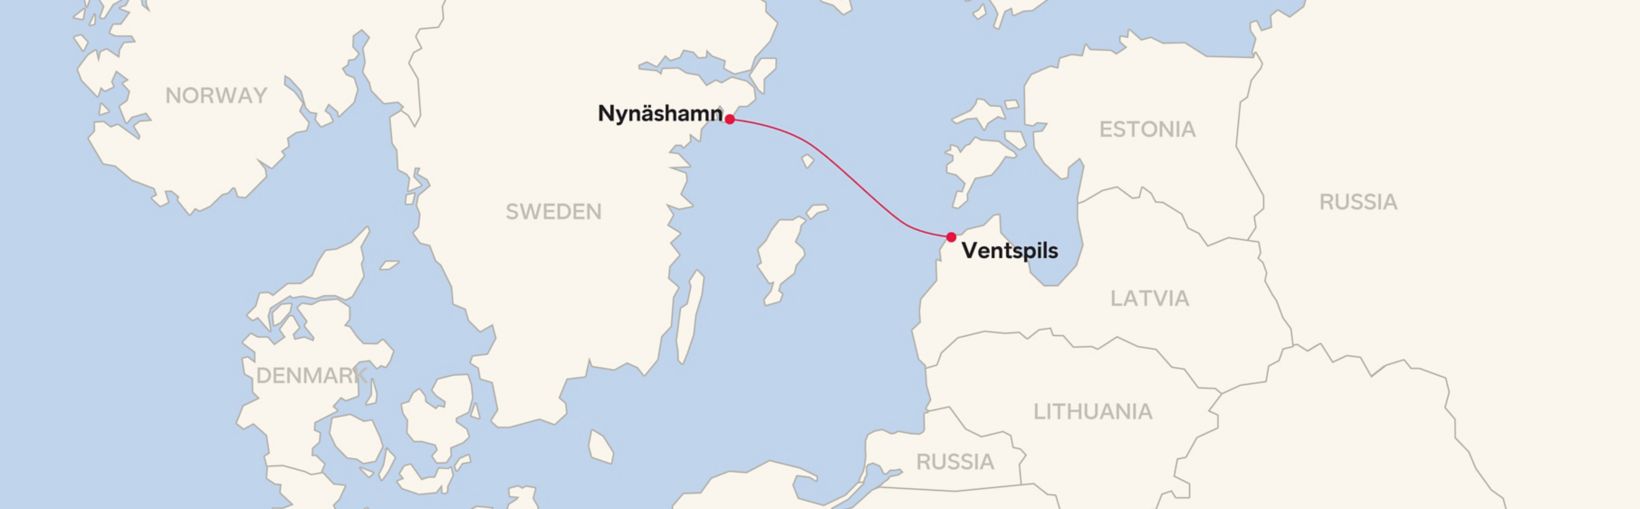 Route map  for Ventspils - Nynäshamn